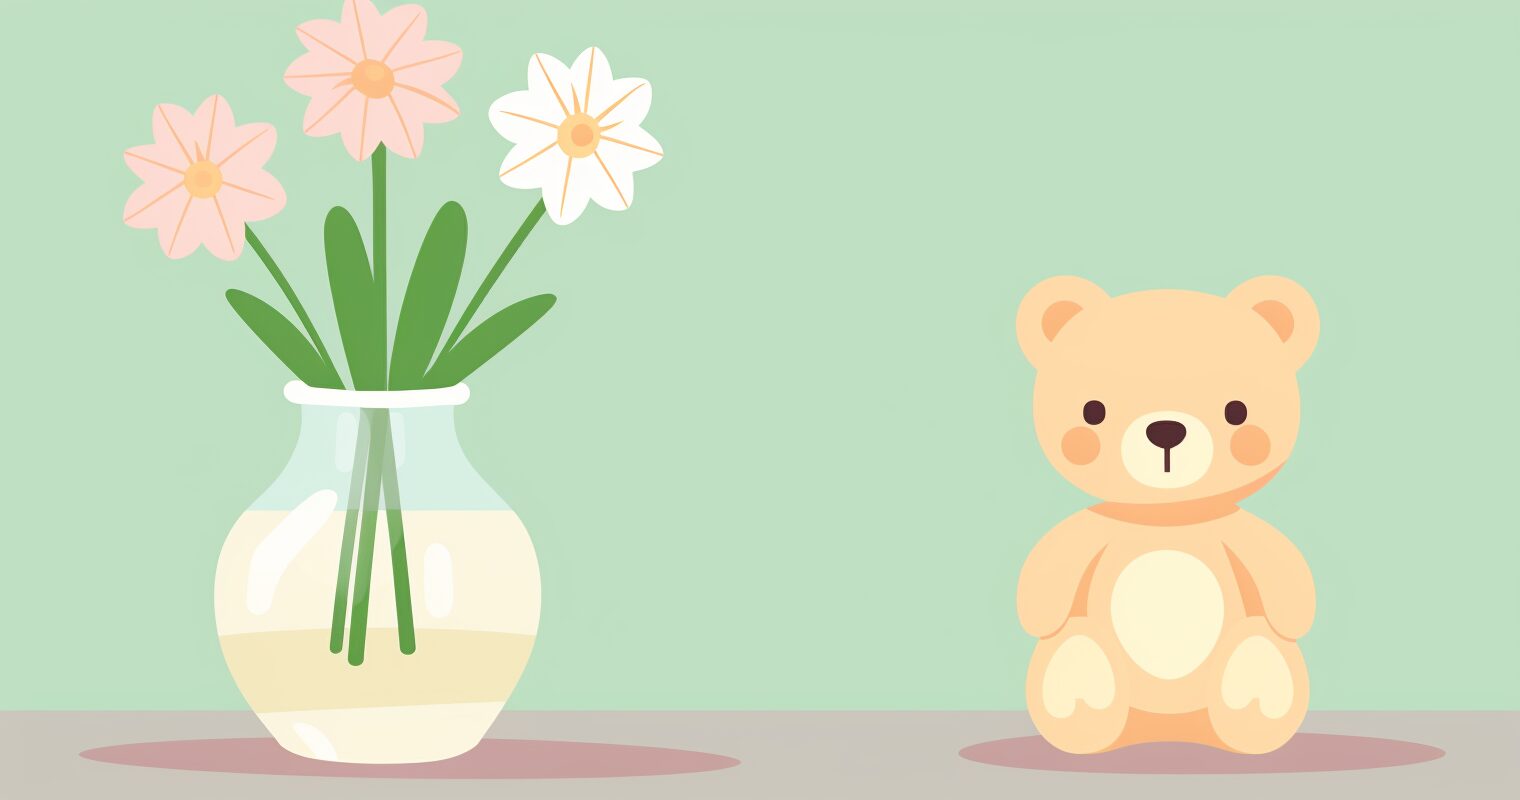 A vase of flowers and a teddy bear.